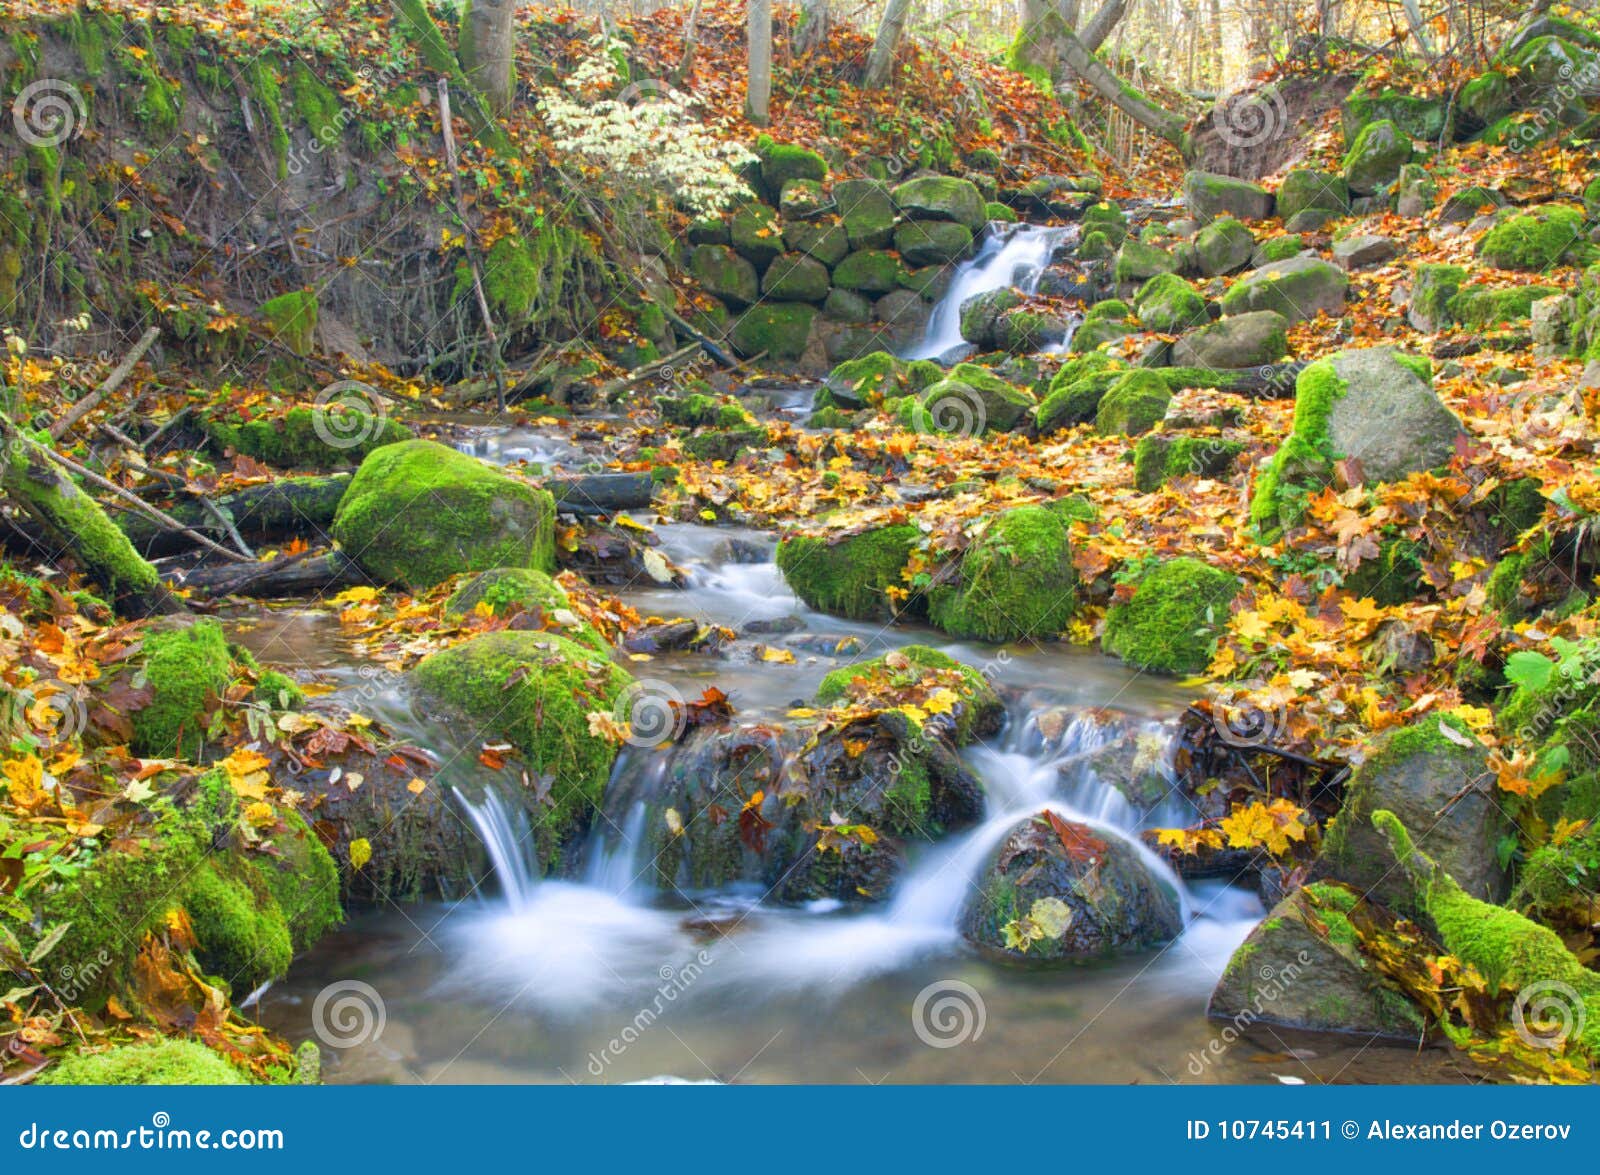 Beautiful Cascade Waterfall In Autumn Forest Stock Image Image Of